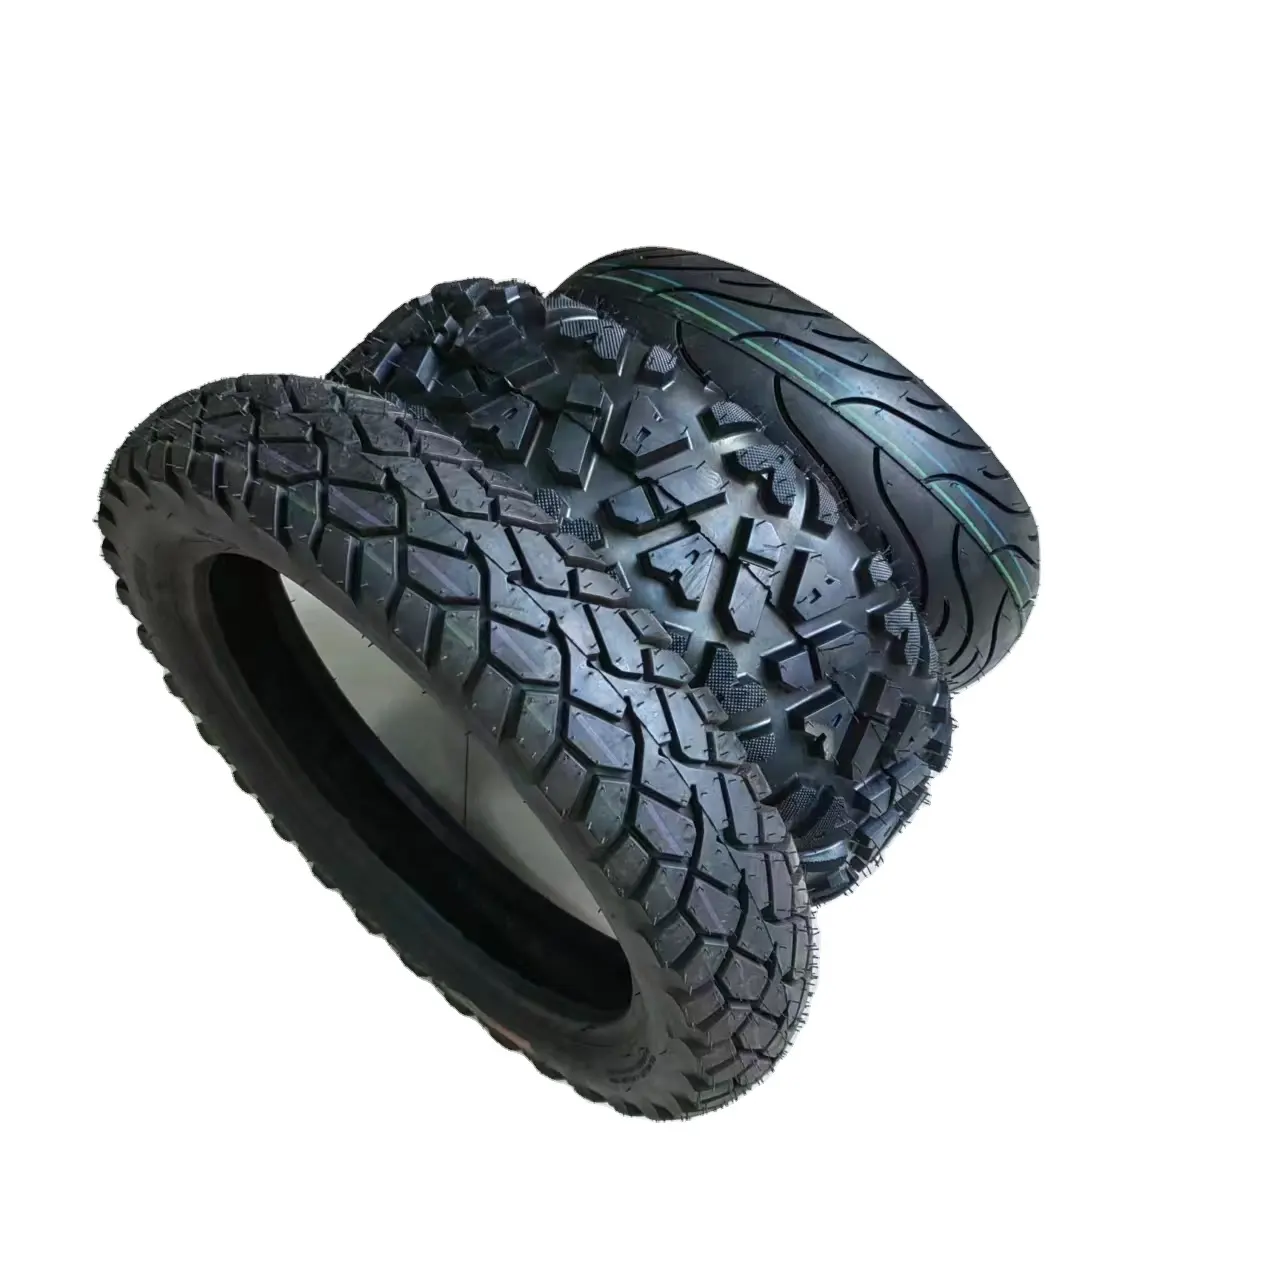 Motorcycle tires/tyres Tube/Tubeless